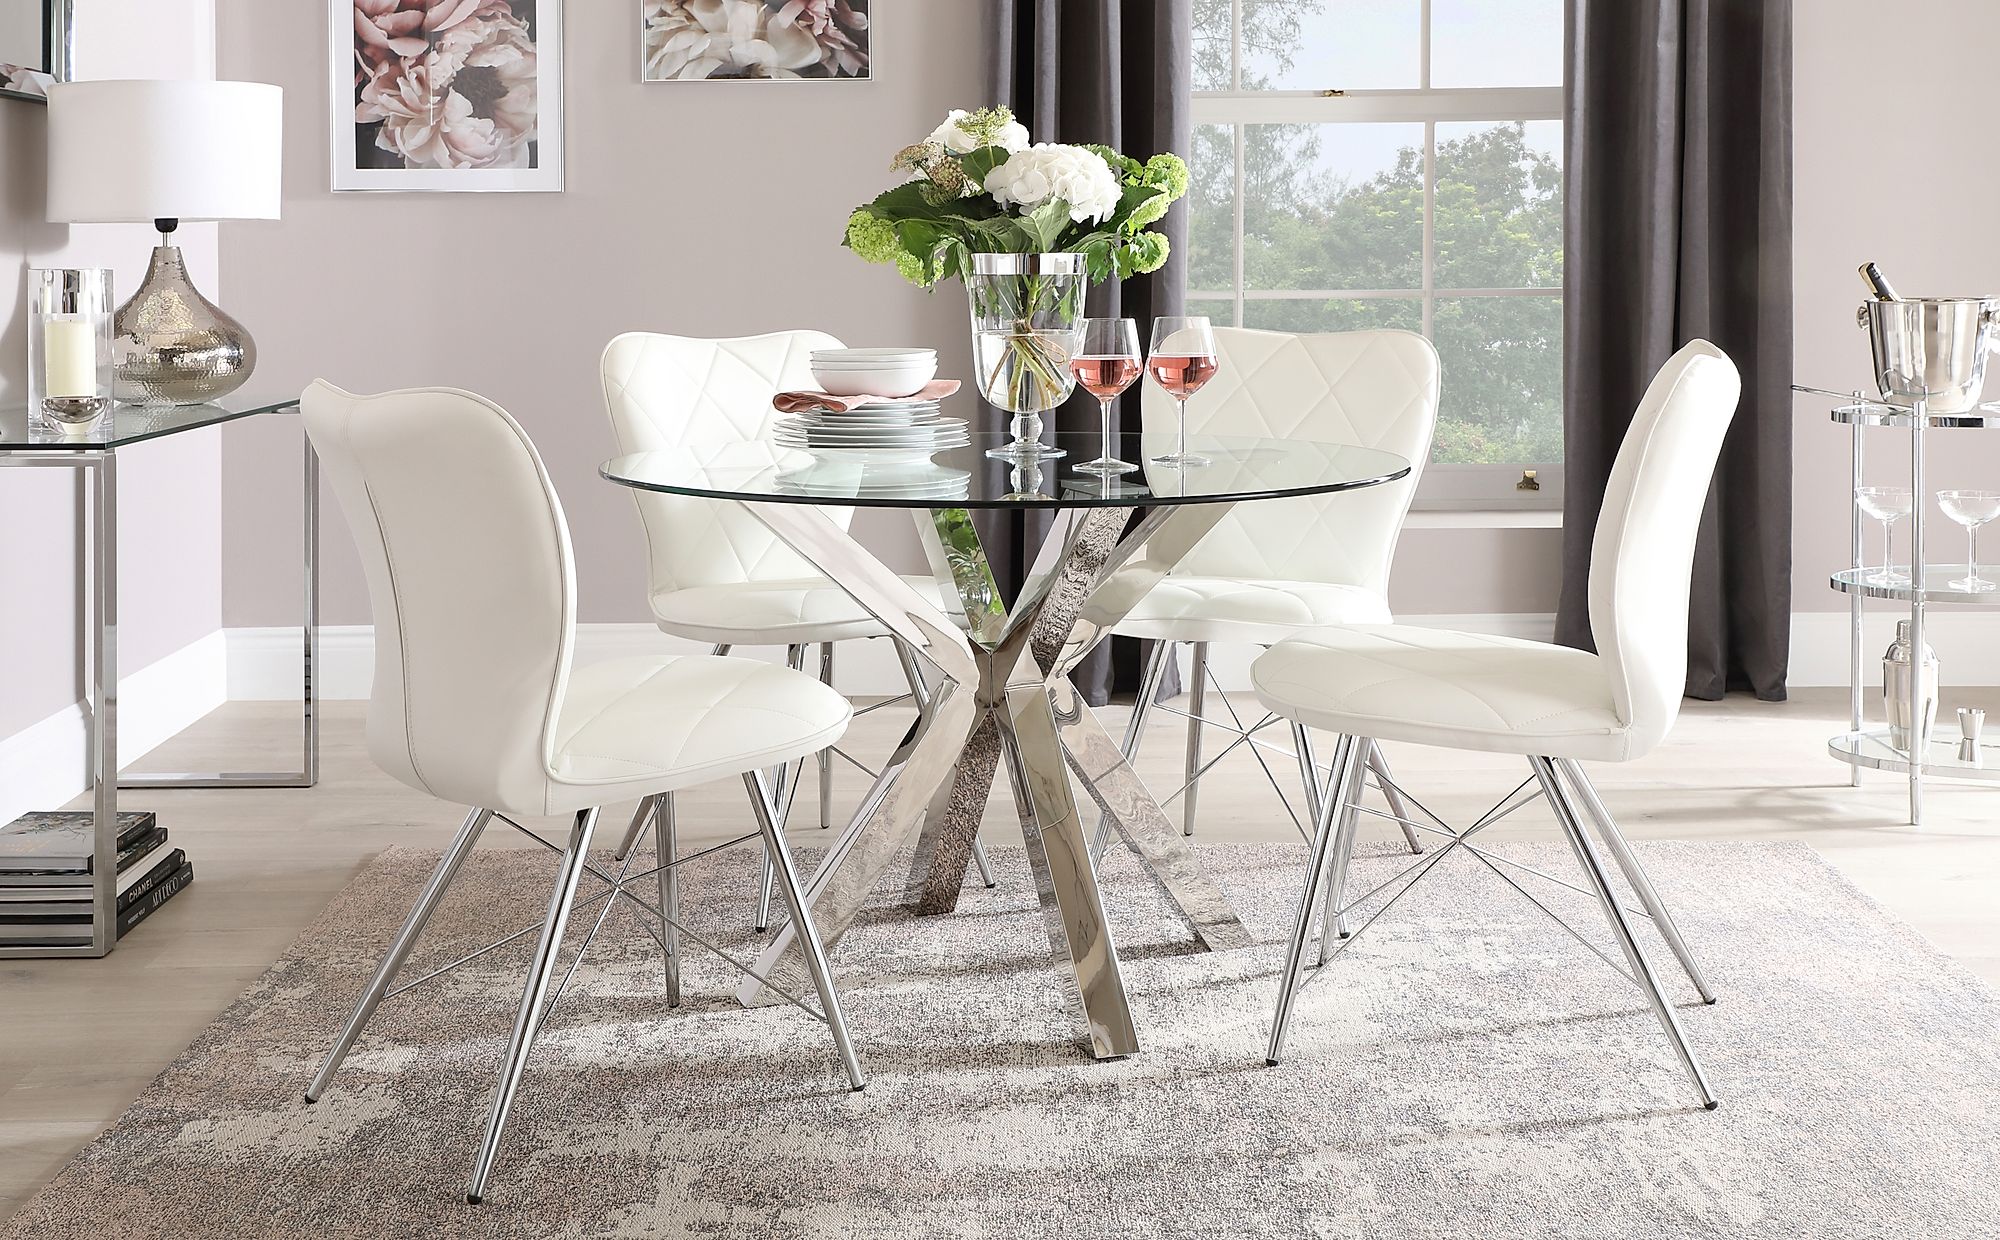 Plaza Round Chrome and Glass Dining Table with 4 Lucca White Leather